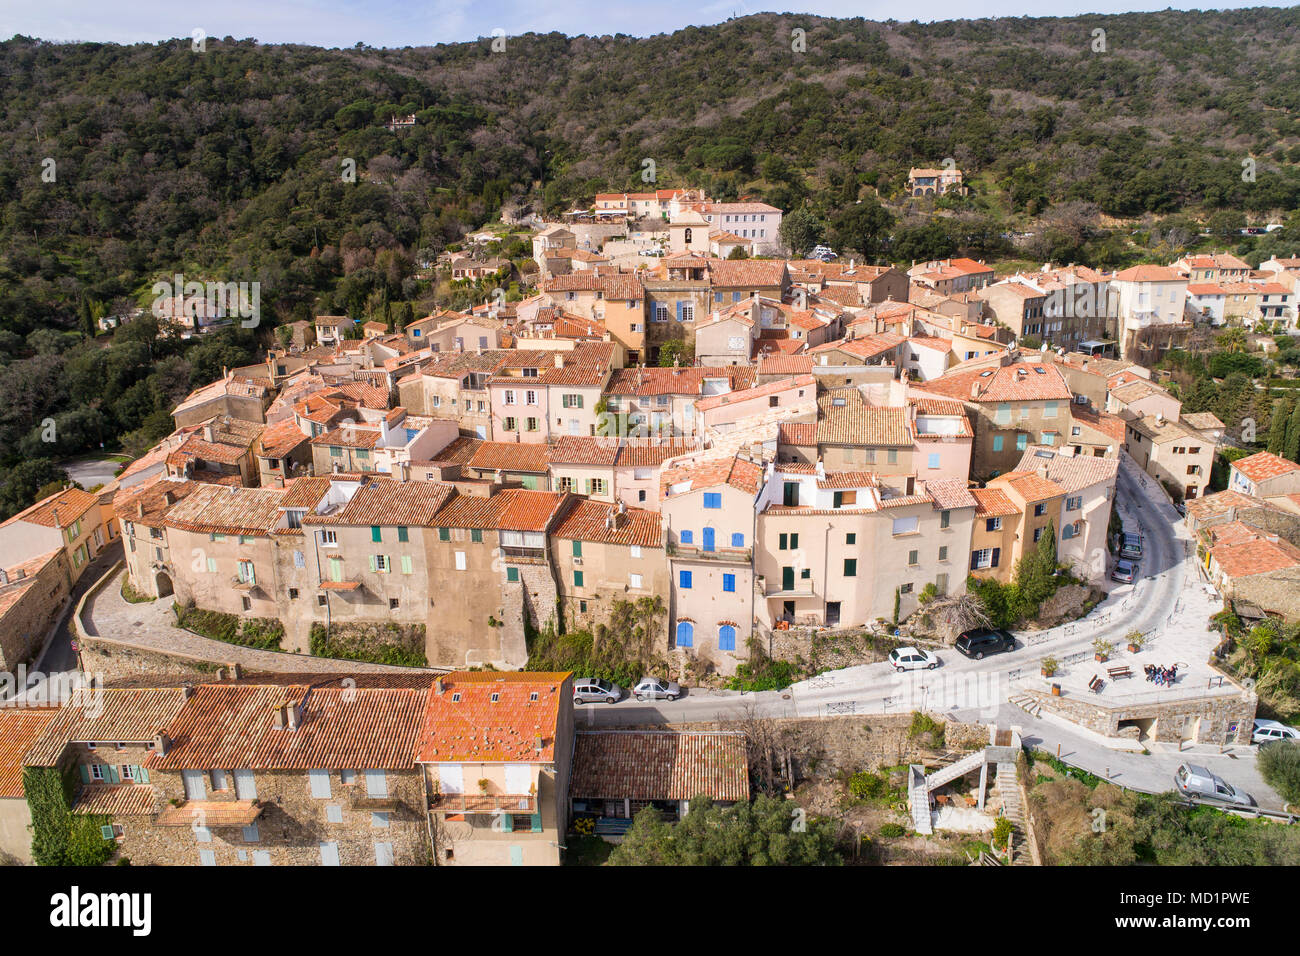 Aerial view of Ramatuelle, Famous Typical village in the south of France Stock Photo